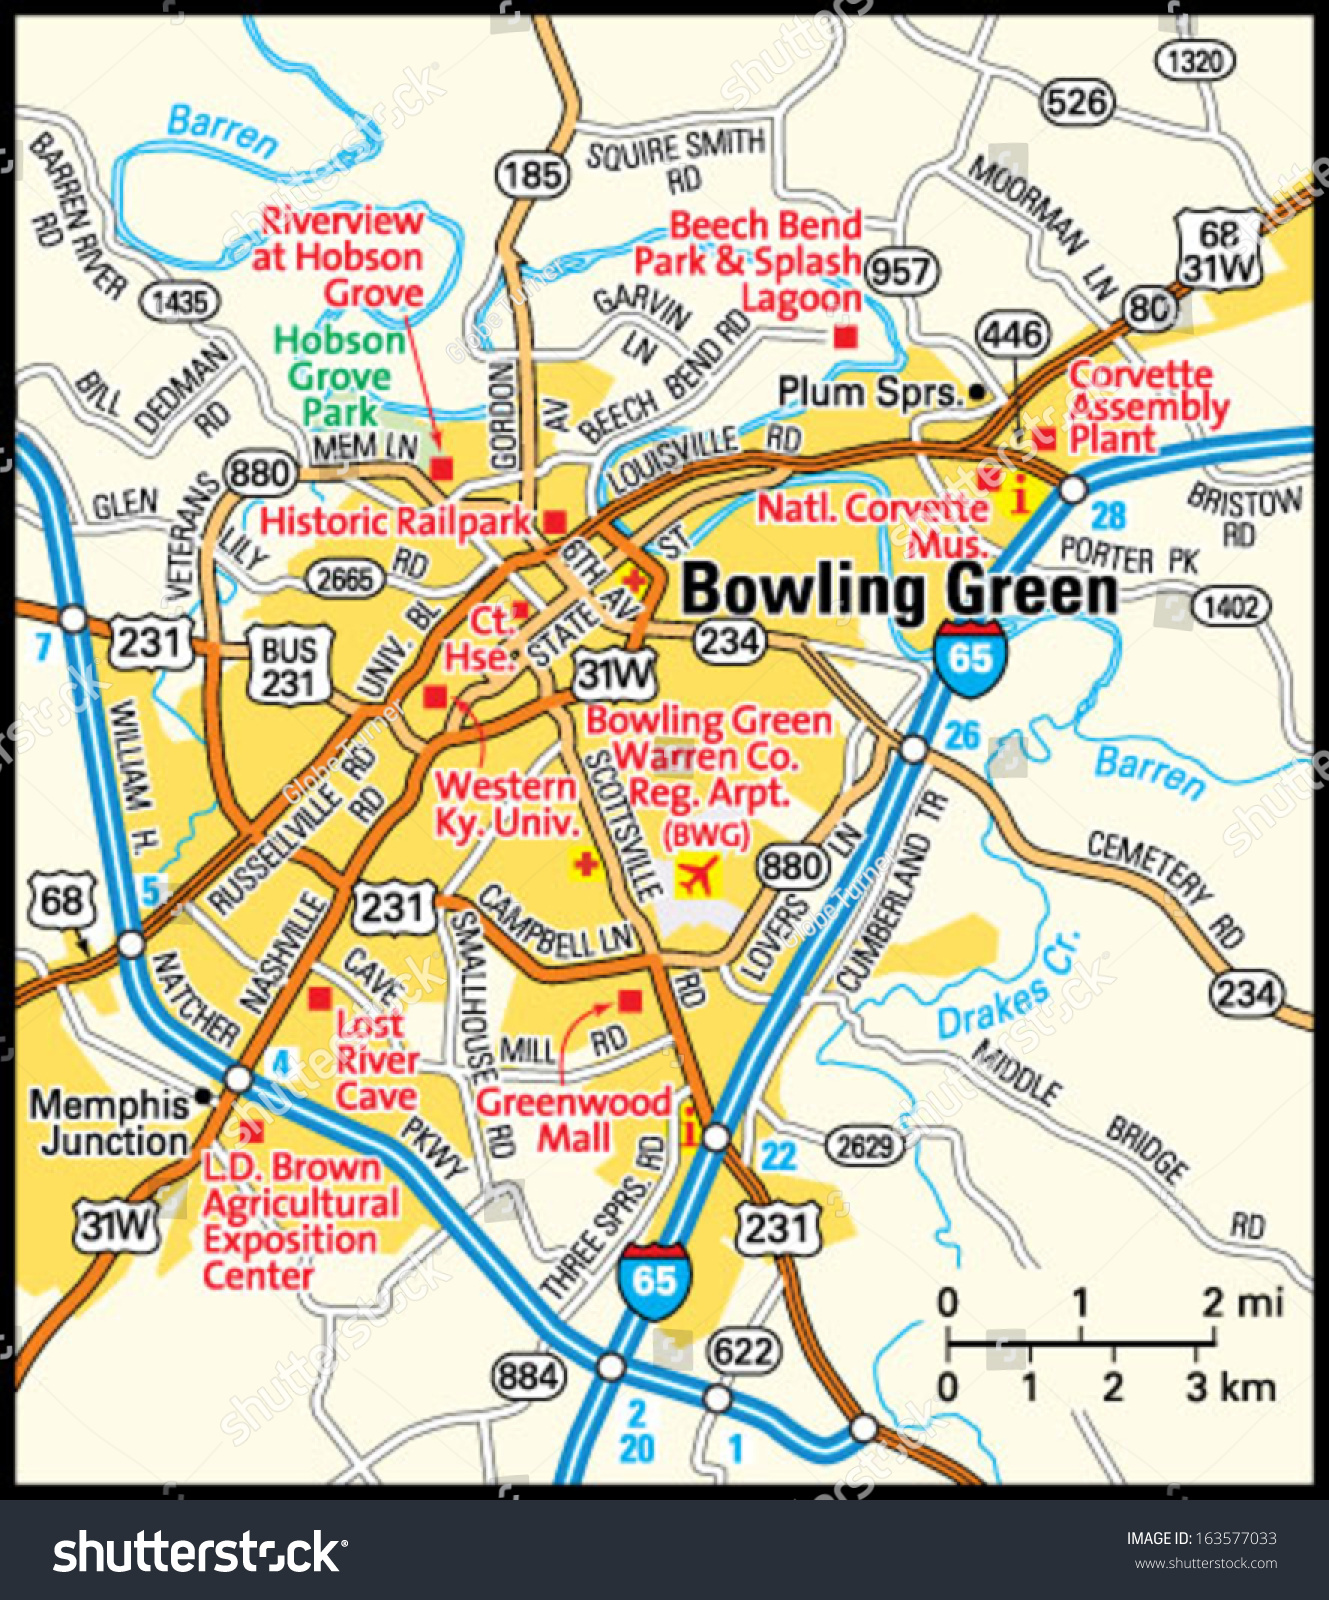 415 Bowling green map Images, Stock Photos & Vectors Shutterstock